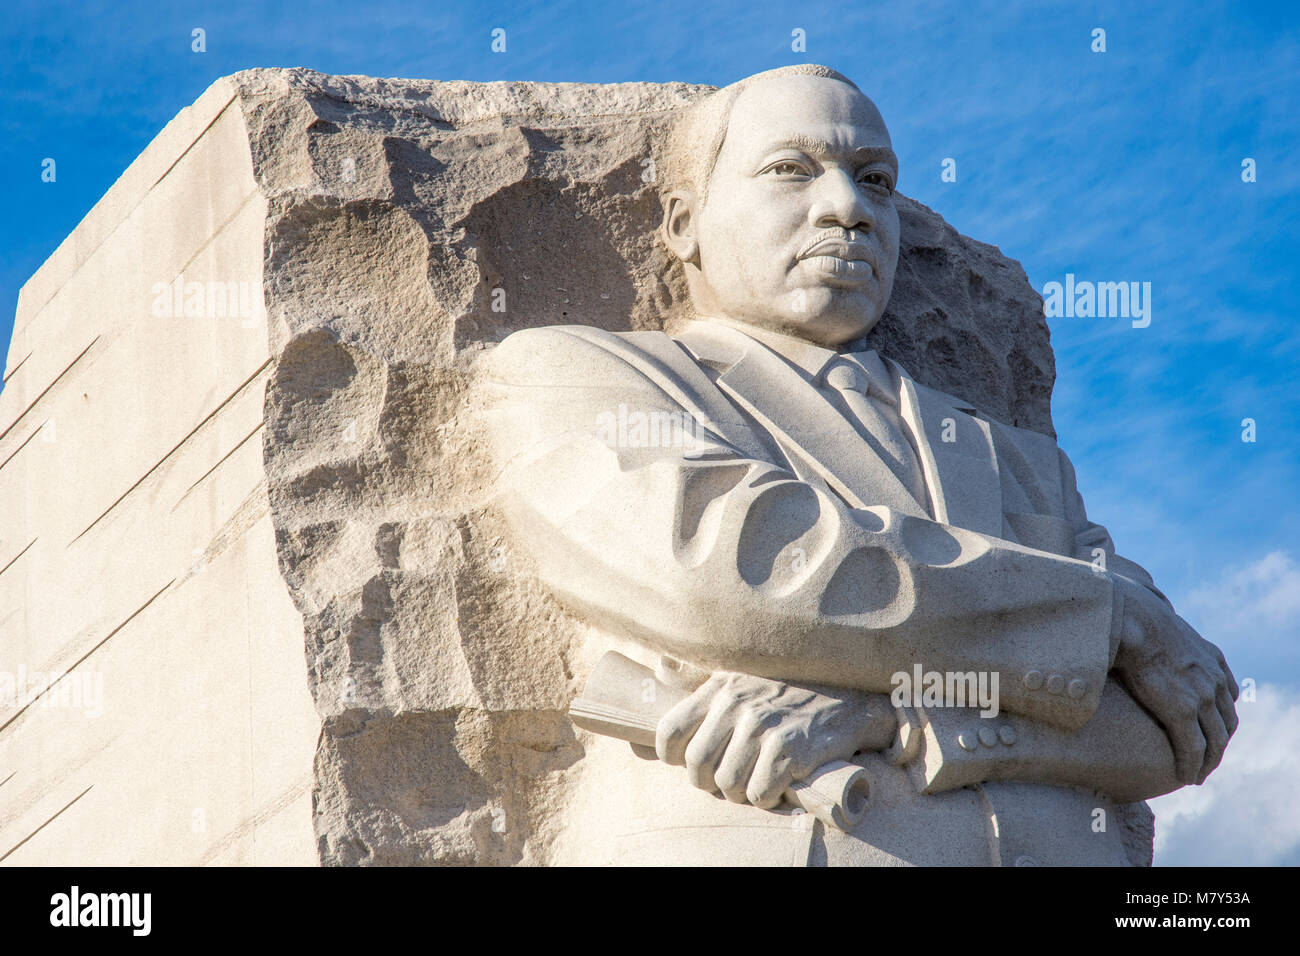 Medium closeup view of the Martin Luther King, Jr. Memorial in Washington, DC. 2018 marks the fiftieth anniversary of Dr. King's assasination, in Apri Stock Photo